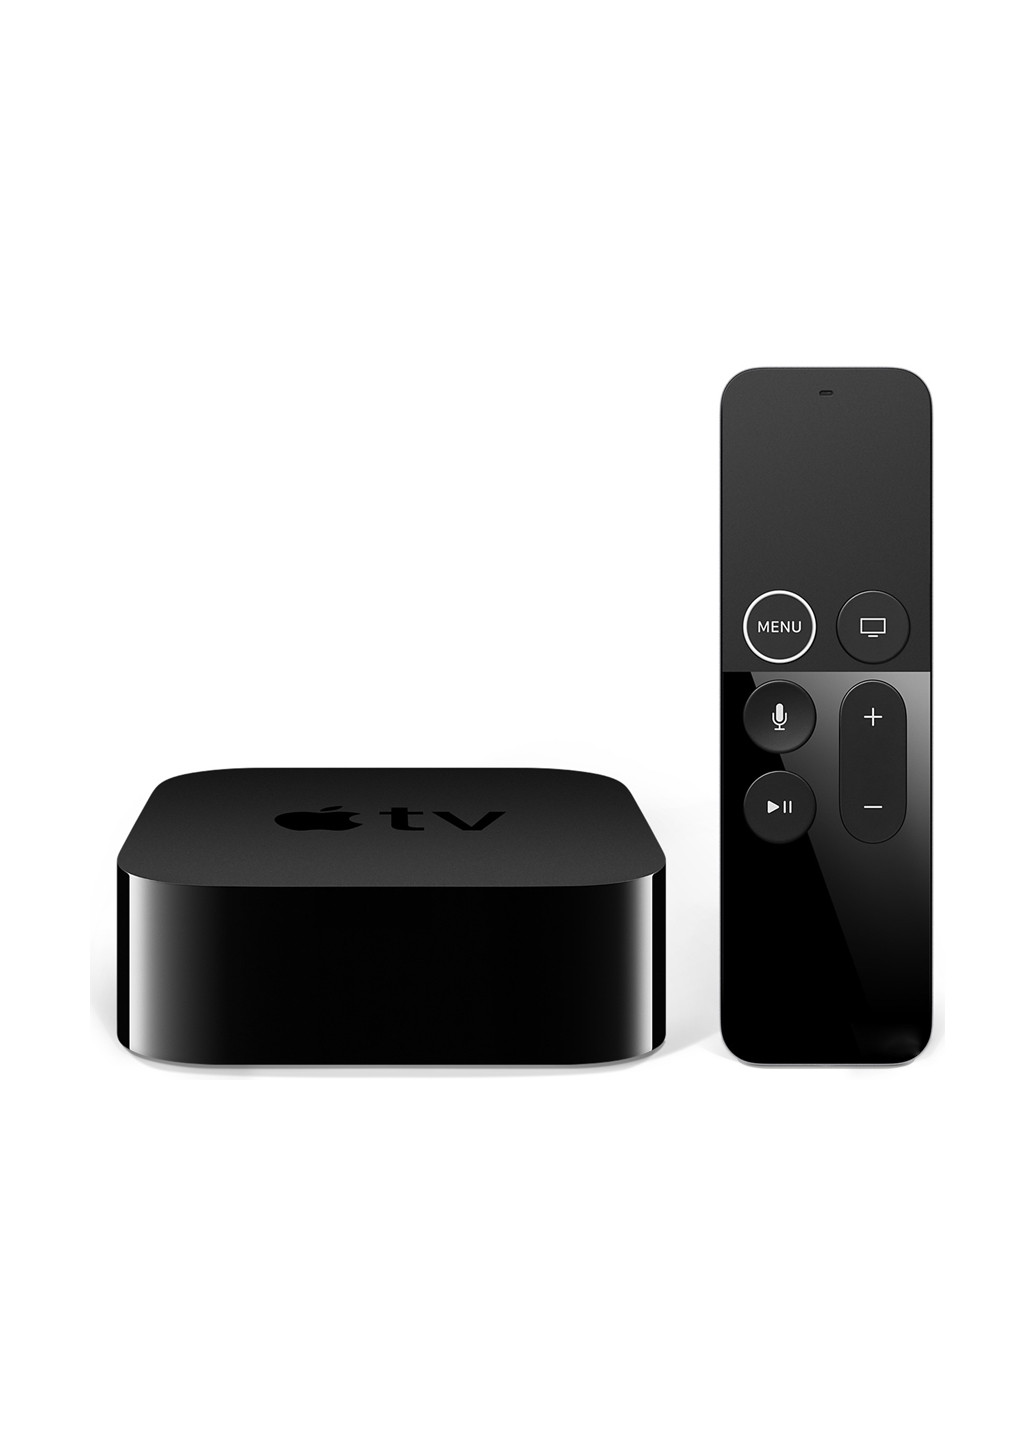 TV 4K (4th generation) 32GB MR912RS / A Apple mr912rs/a (145091269)